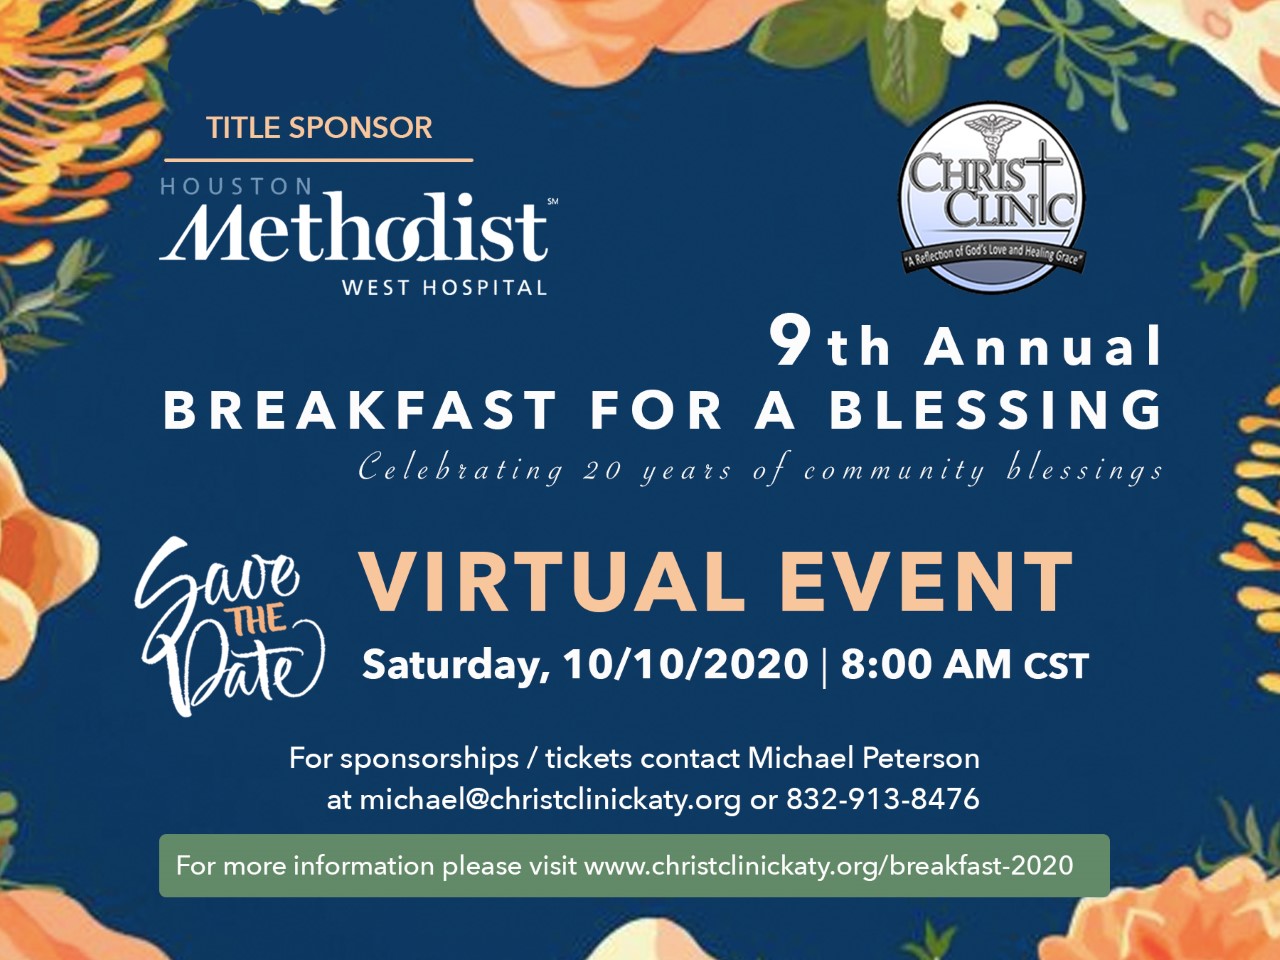 Christ Clinic’s premiere fundraiser Breakfast for a Blessing goes virtual celebrating 20 years of community blessings Main Photo